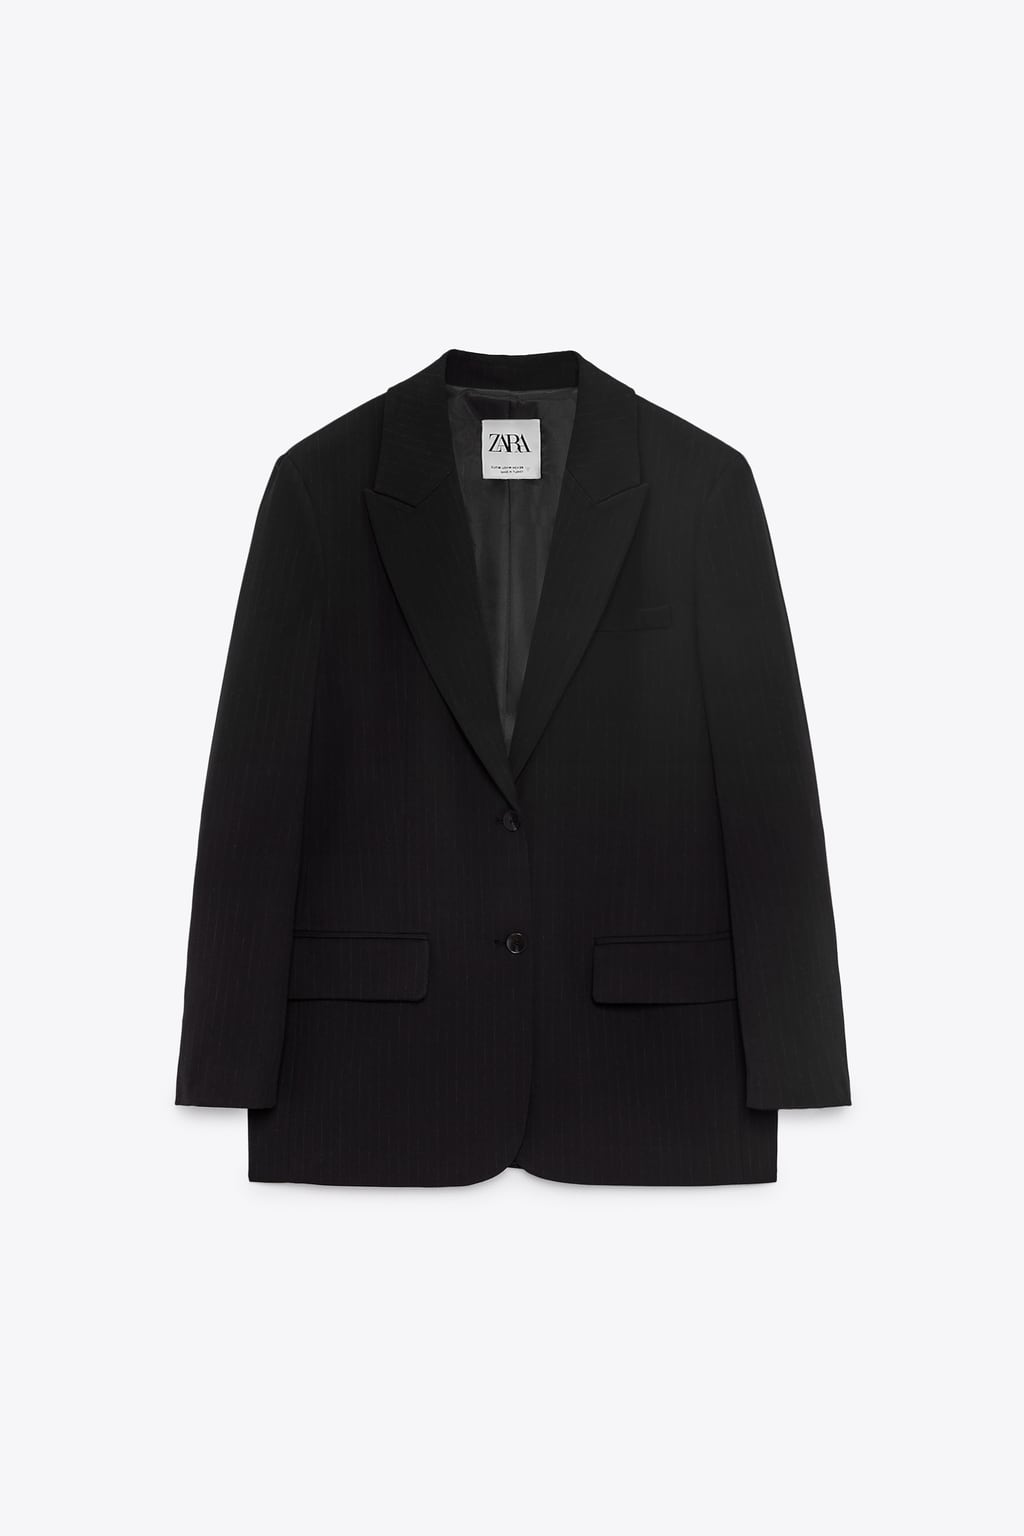 I Practically Collect Zara Blazers—Here Are 25 I Love | Who What Wear UK